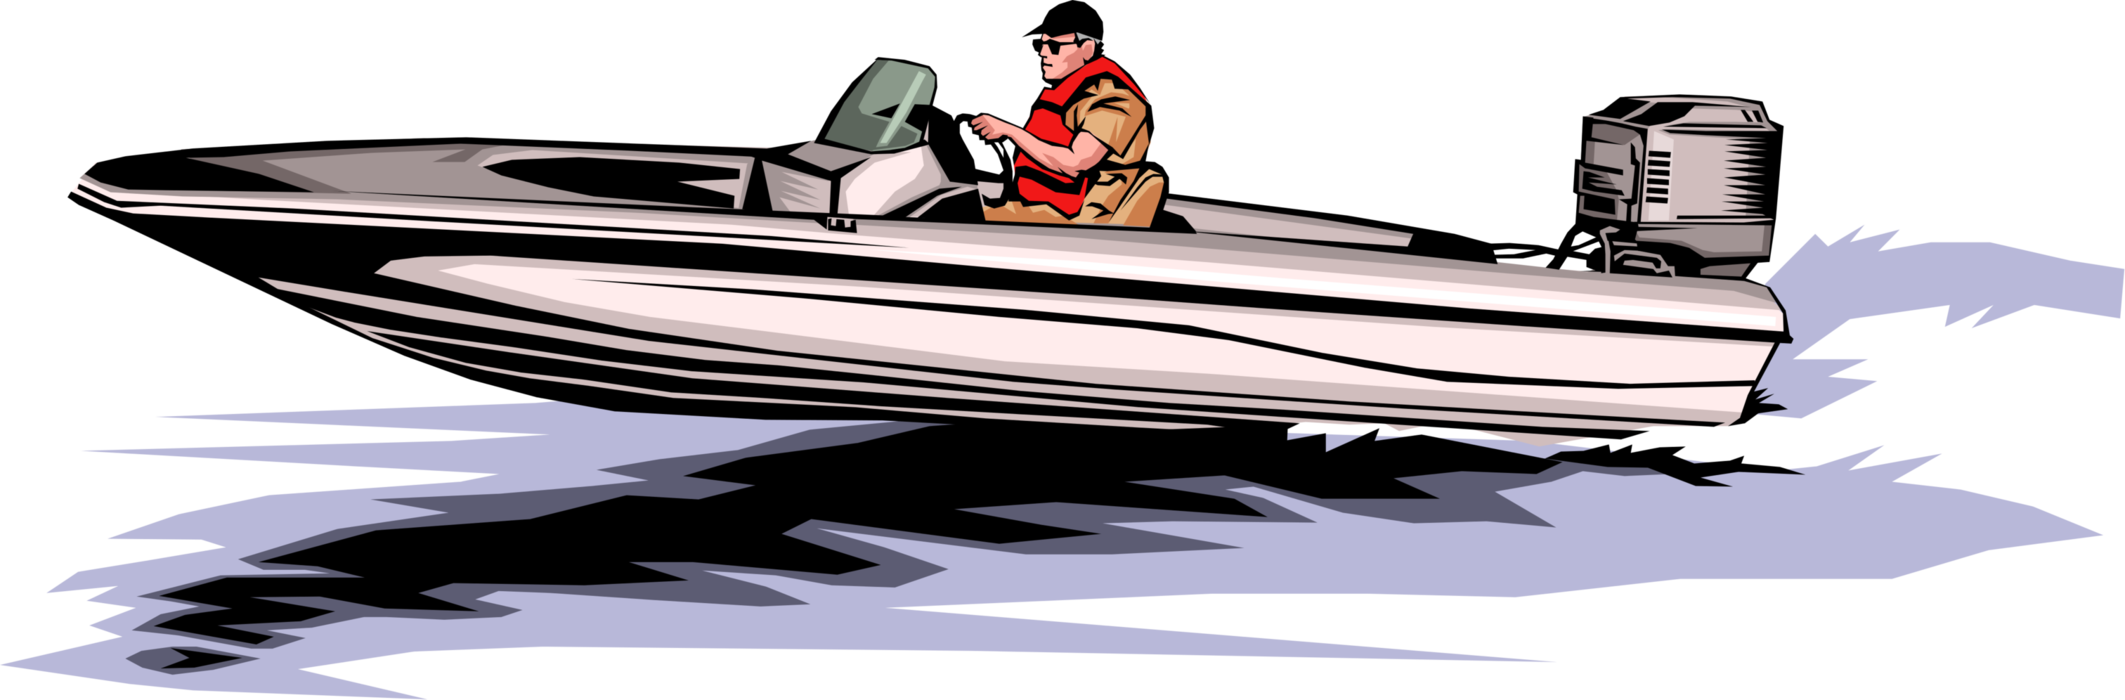 Vector Illustration of Sport Fisherman Angler in Boat Races to Fishing Grounds